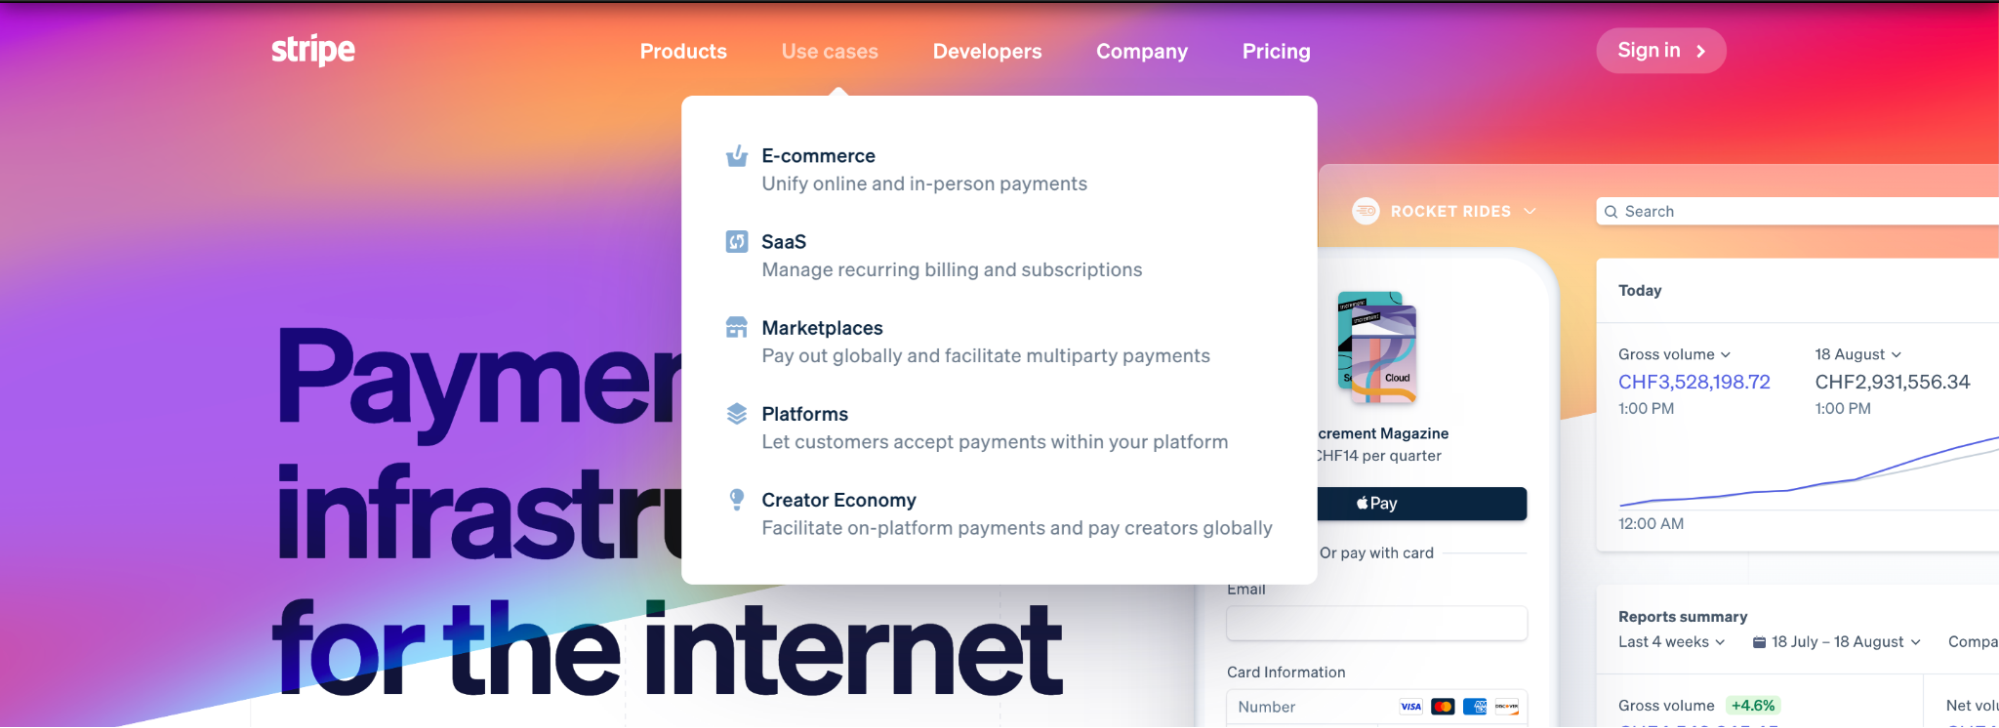 screenshot of Stripe website drop-down menu listing possible use cases for their product